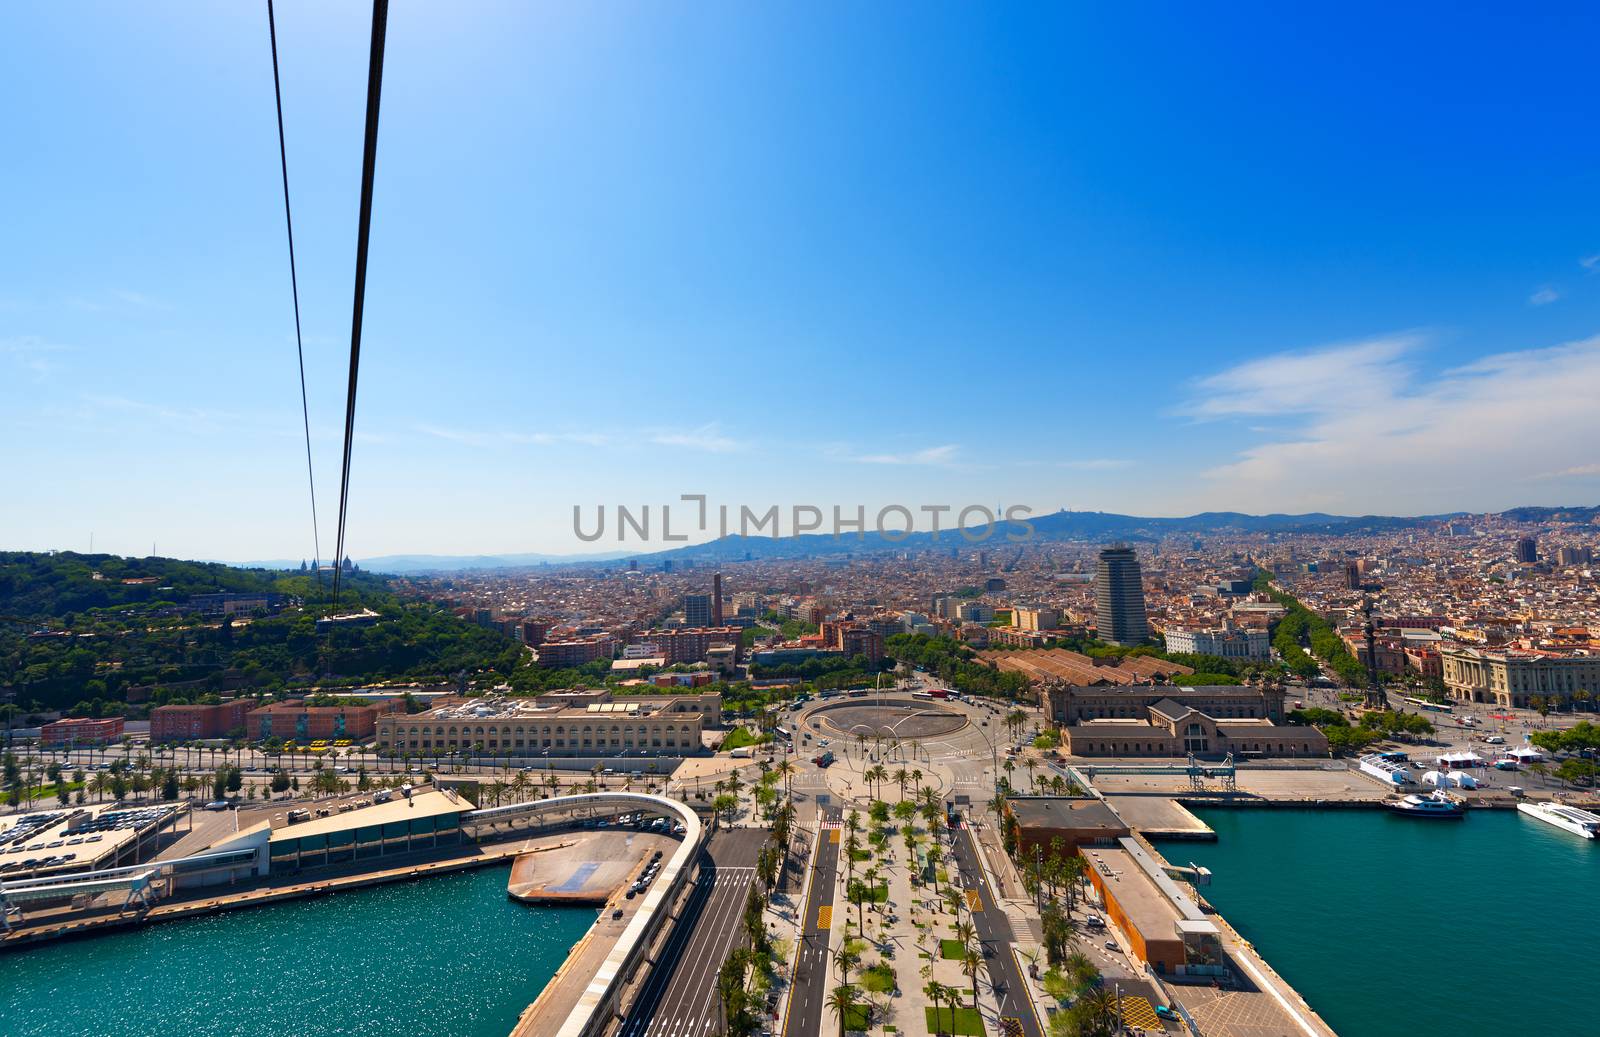 Aerial View of Barcelona - Spain by catalby